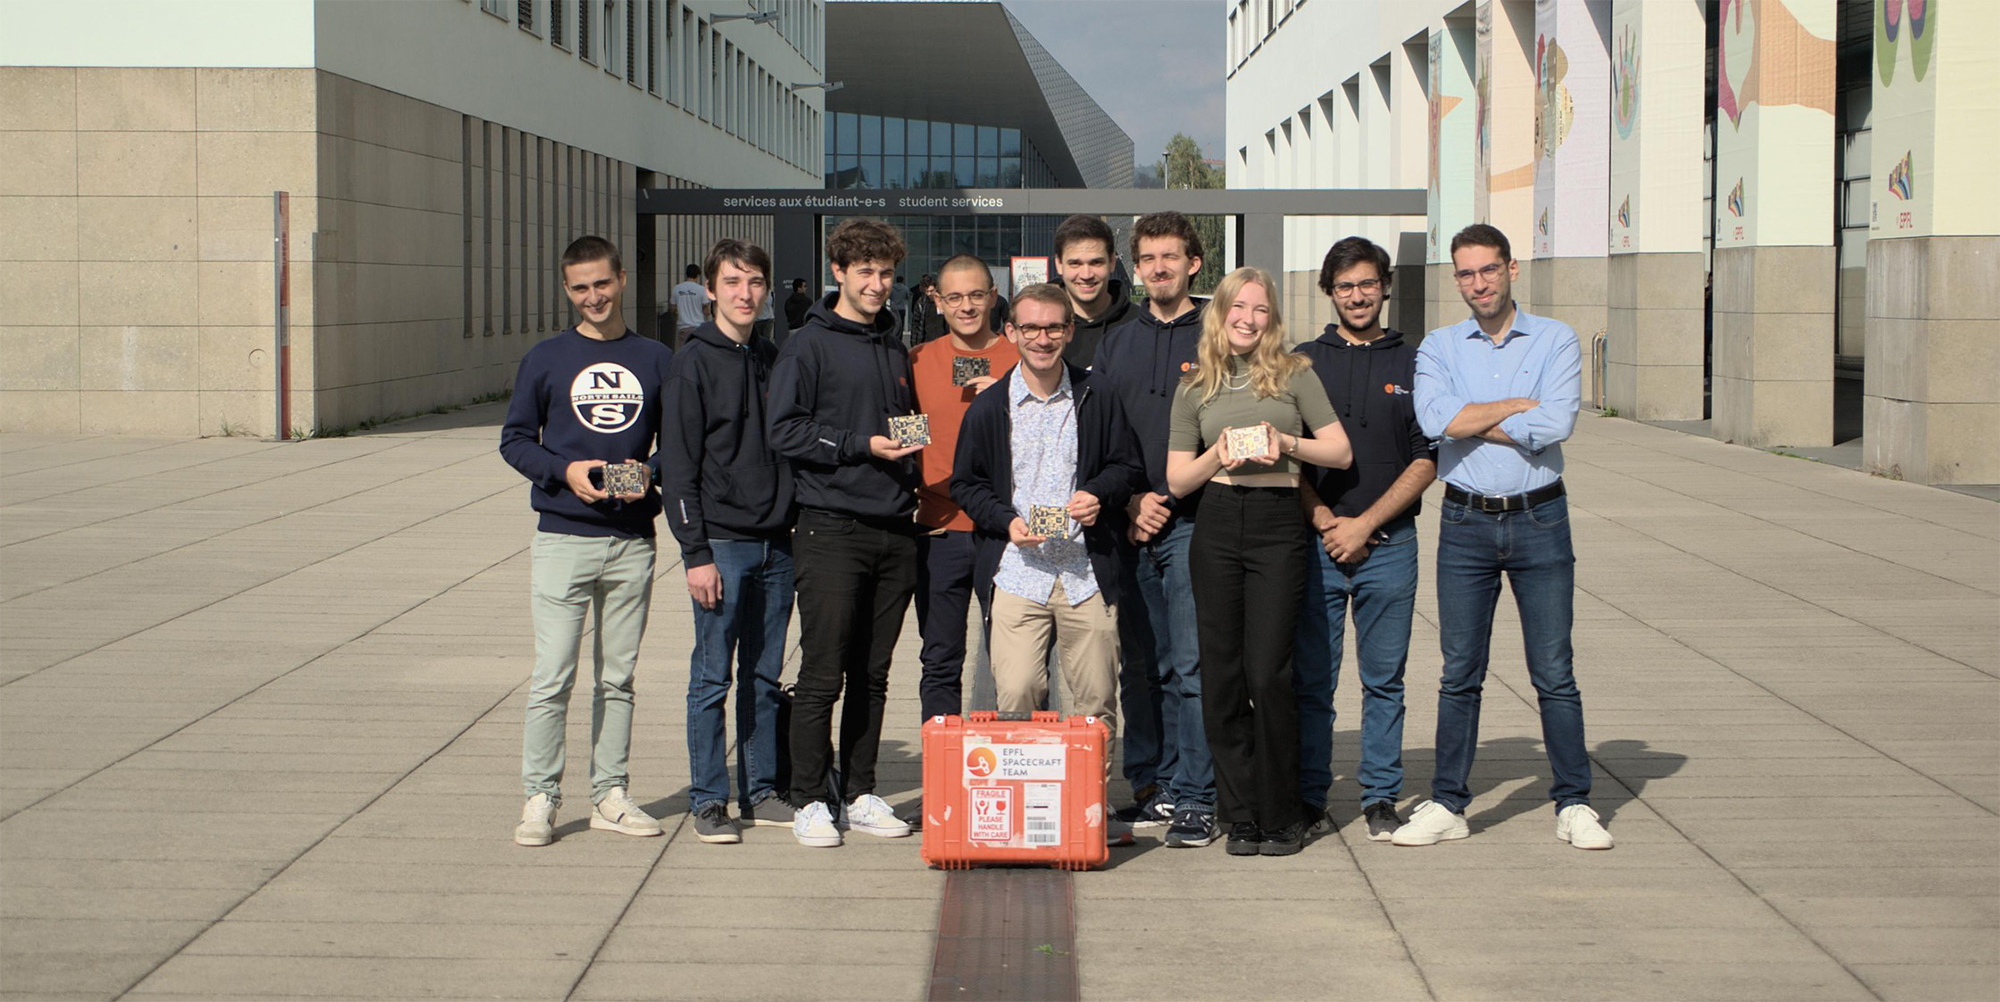 Group photo of the EPFL Spacecraft Team